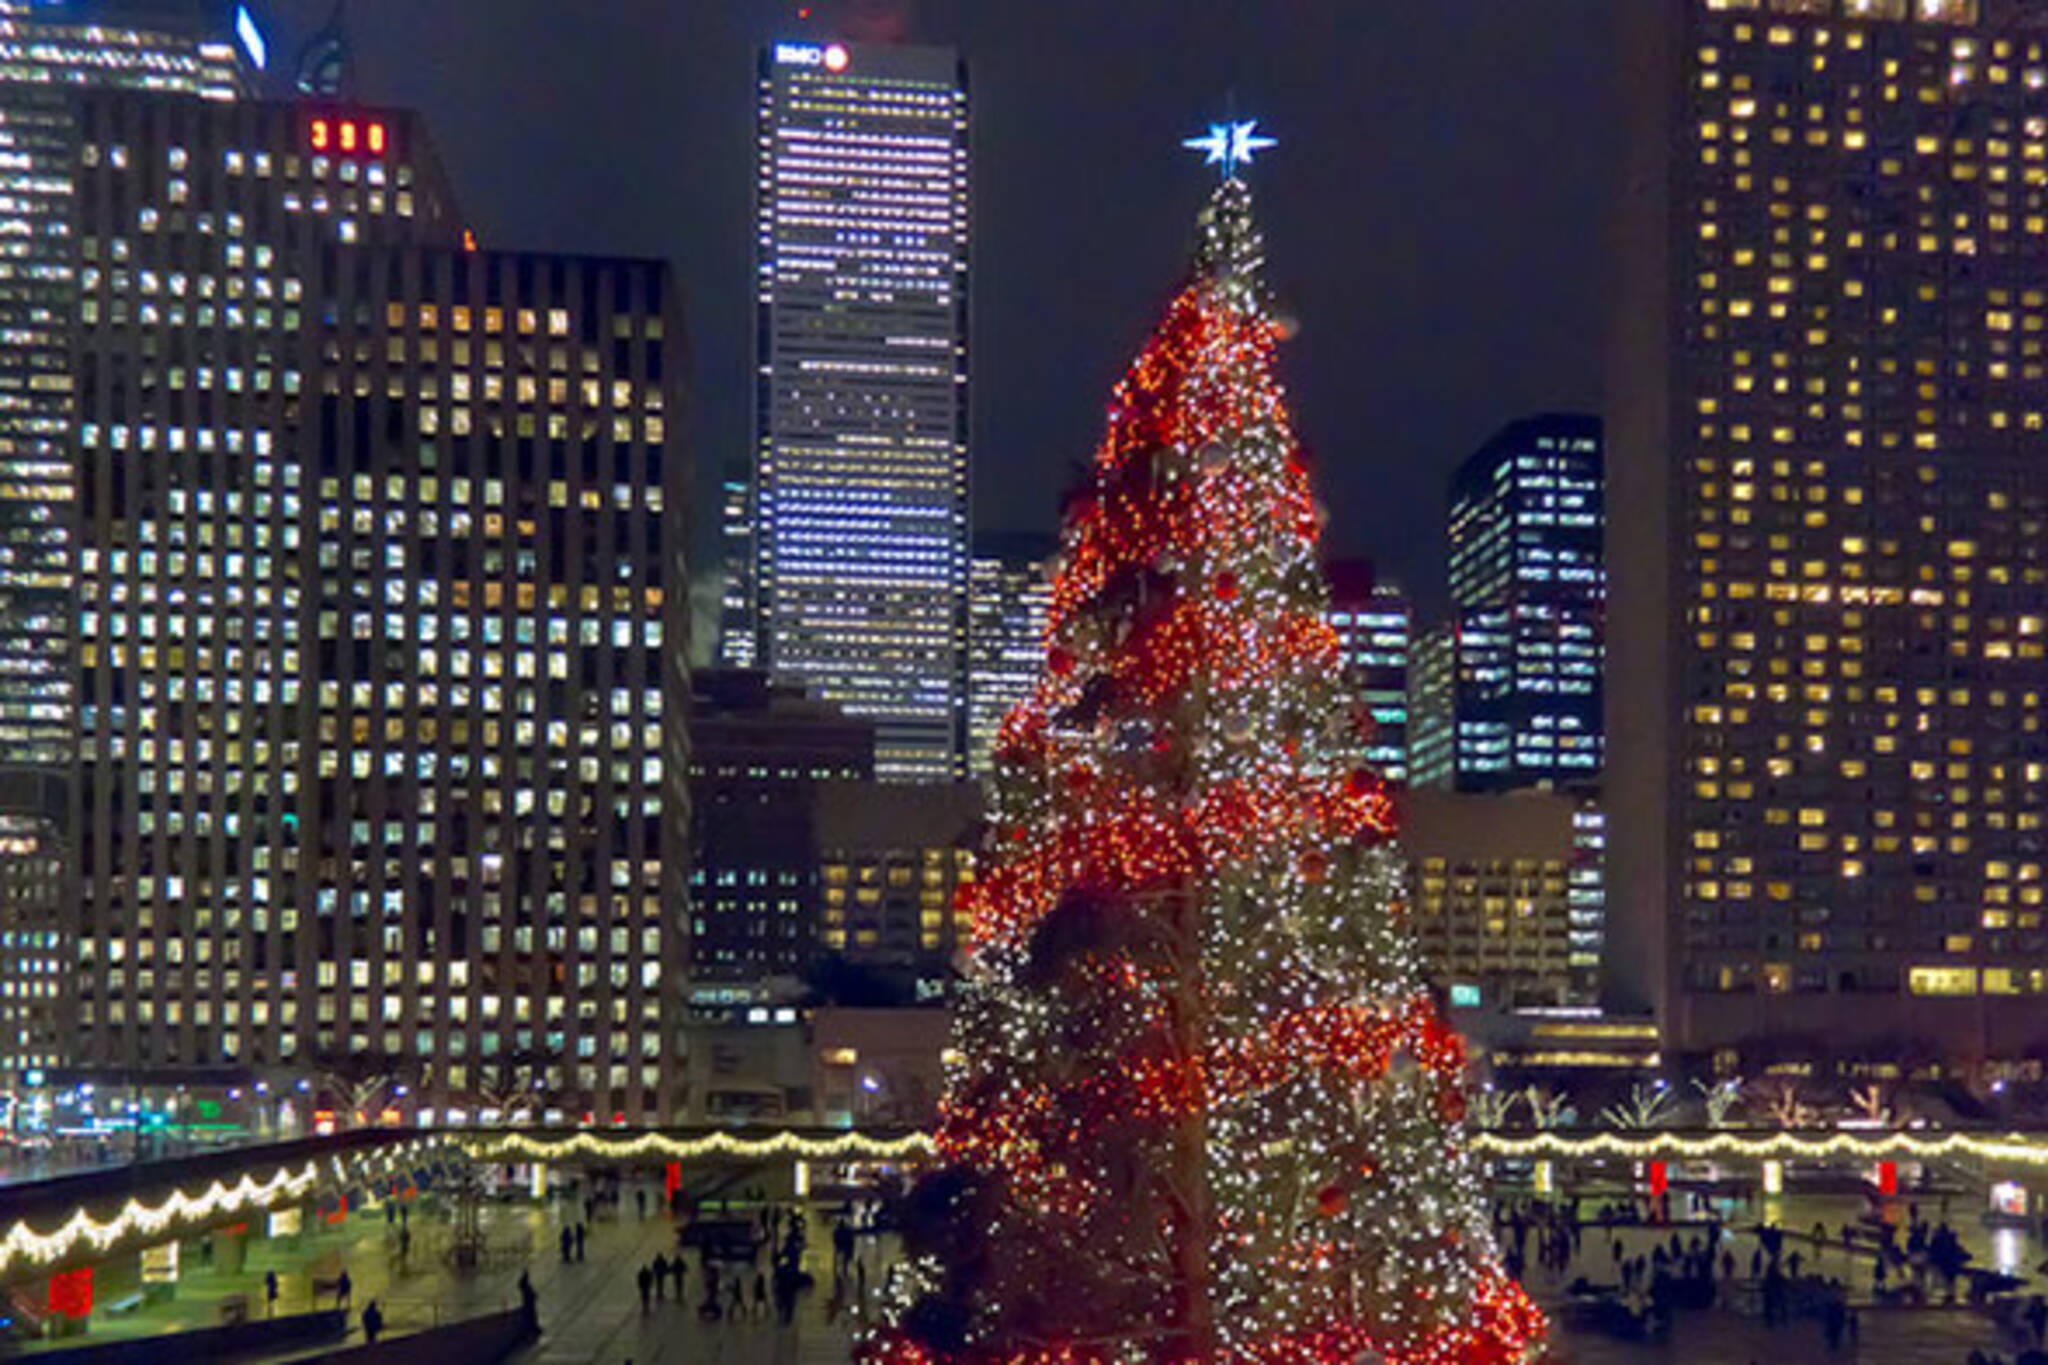 Toronto is about to get Canada's biggest Christmas tree